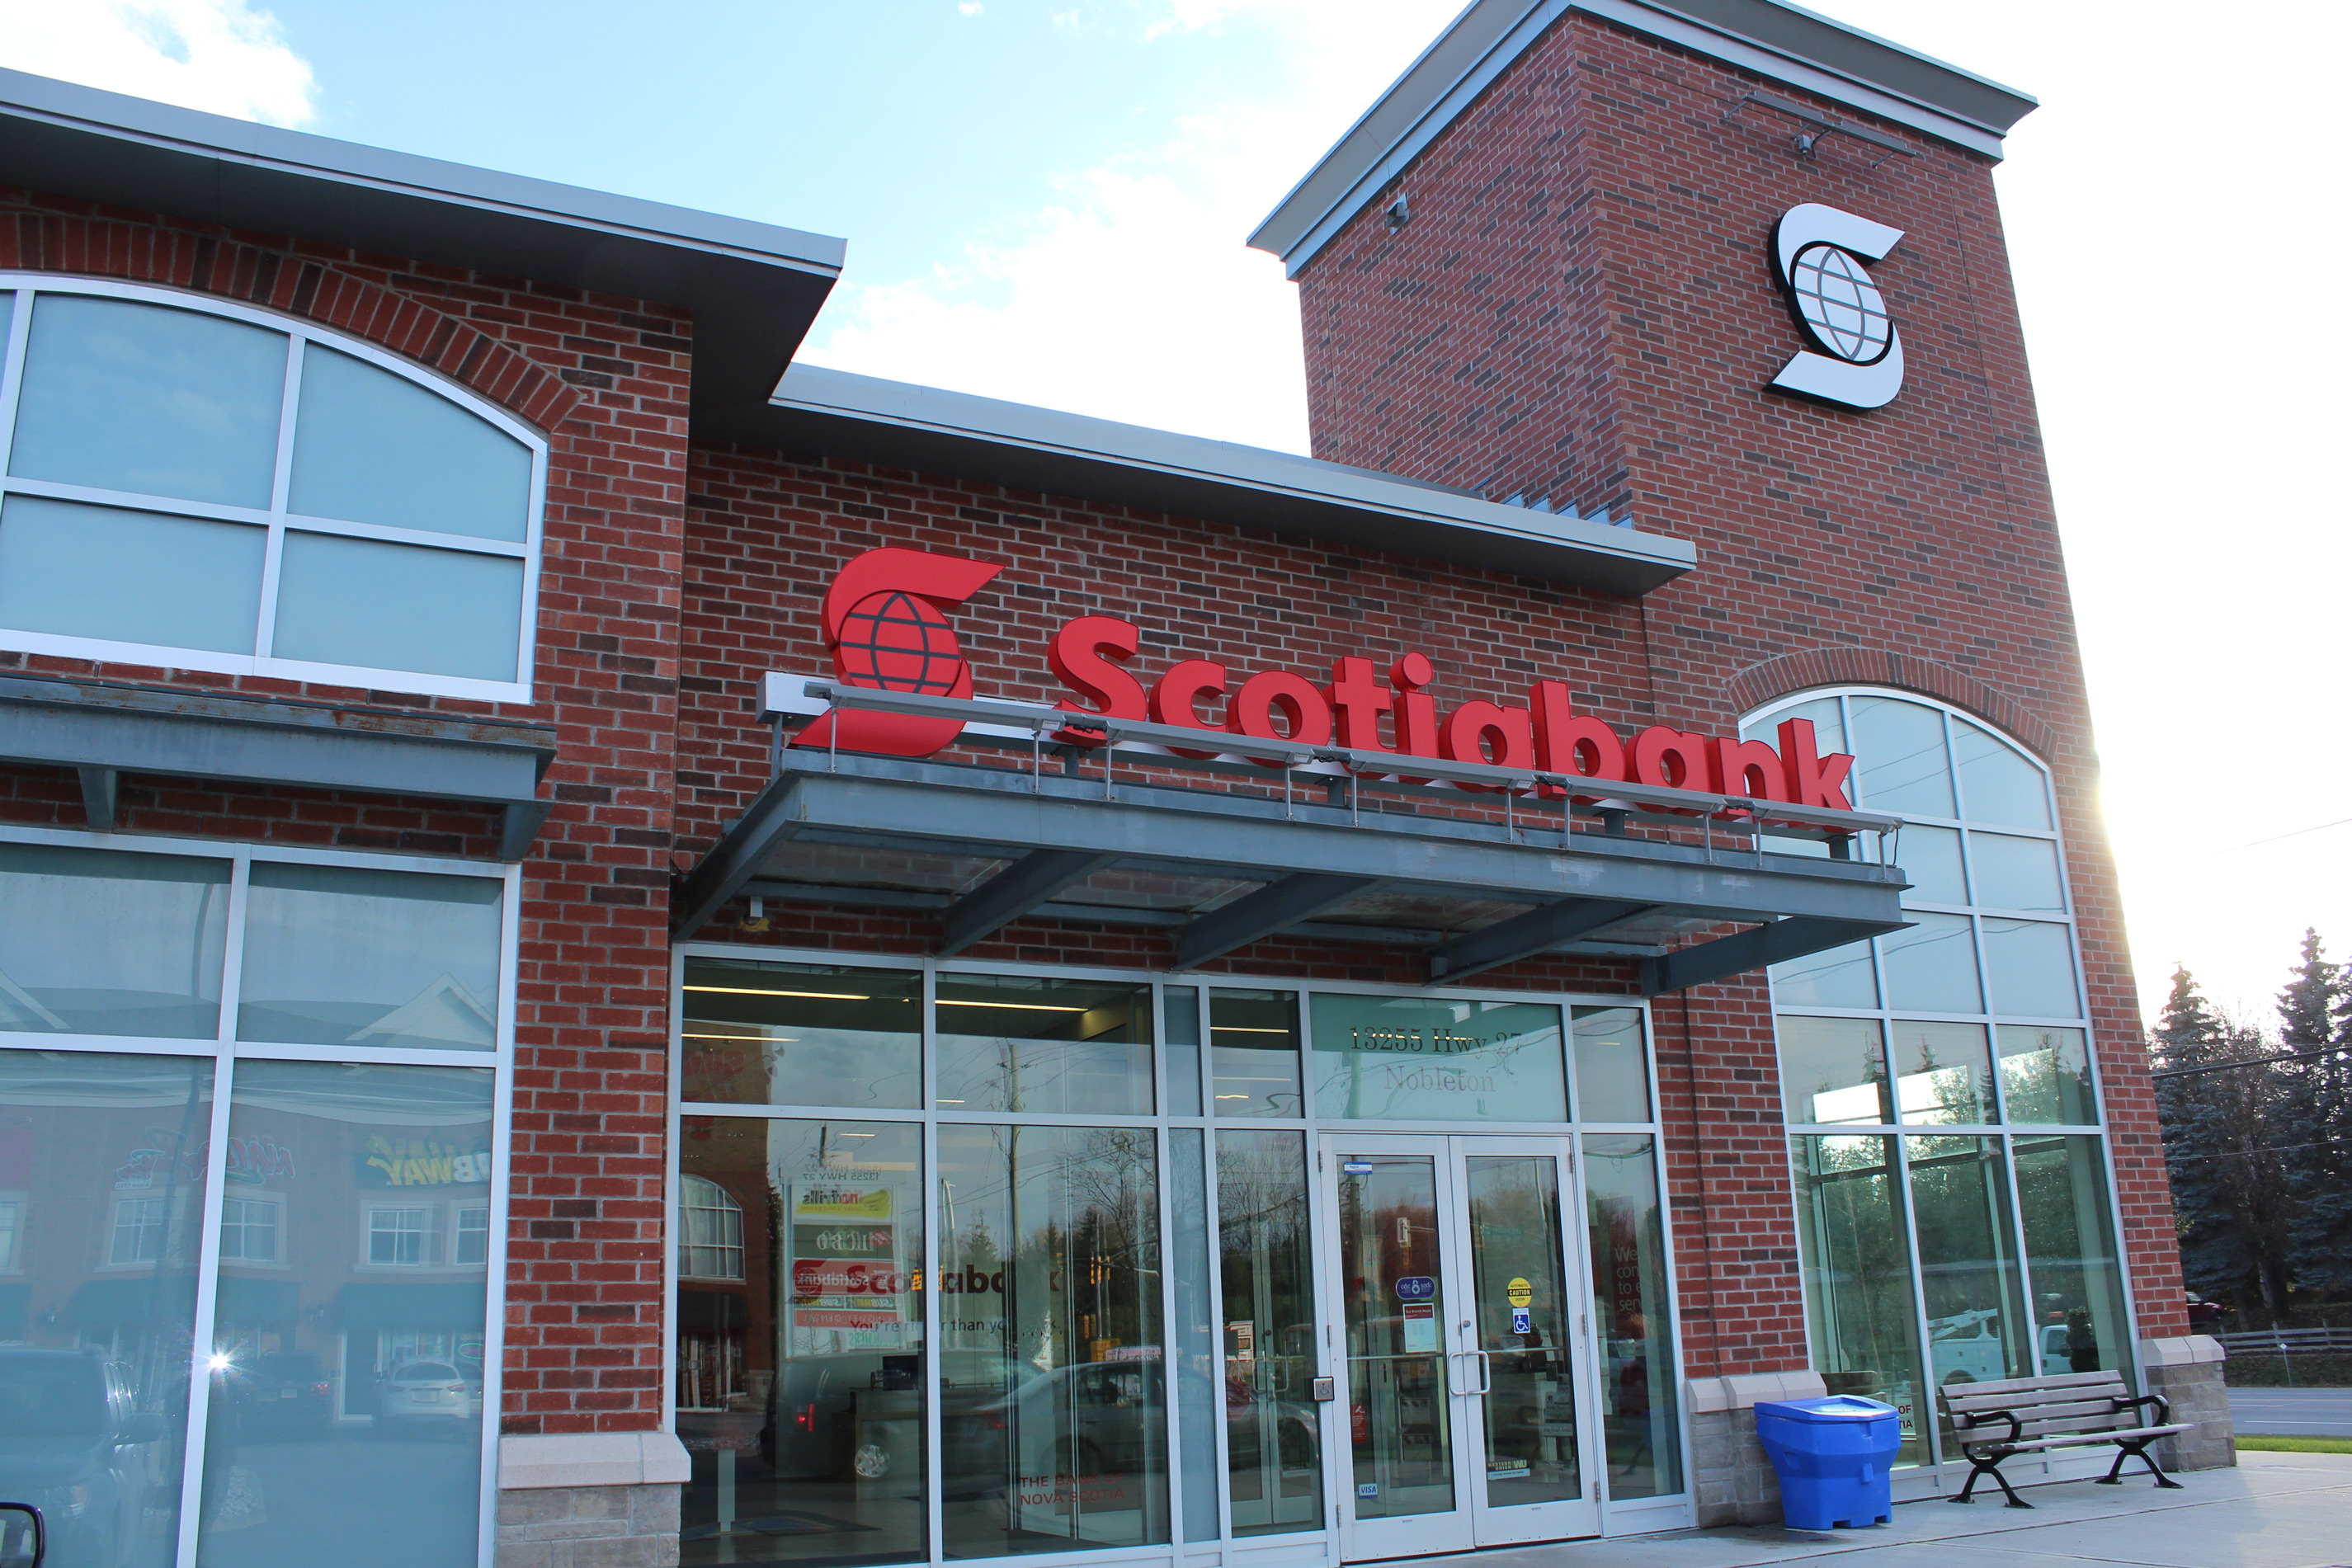 Entrance shot of Scotiabank building - Brick colour is Old School, Stone colour is Driftwood